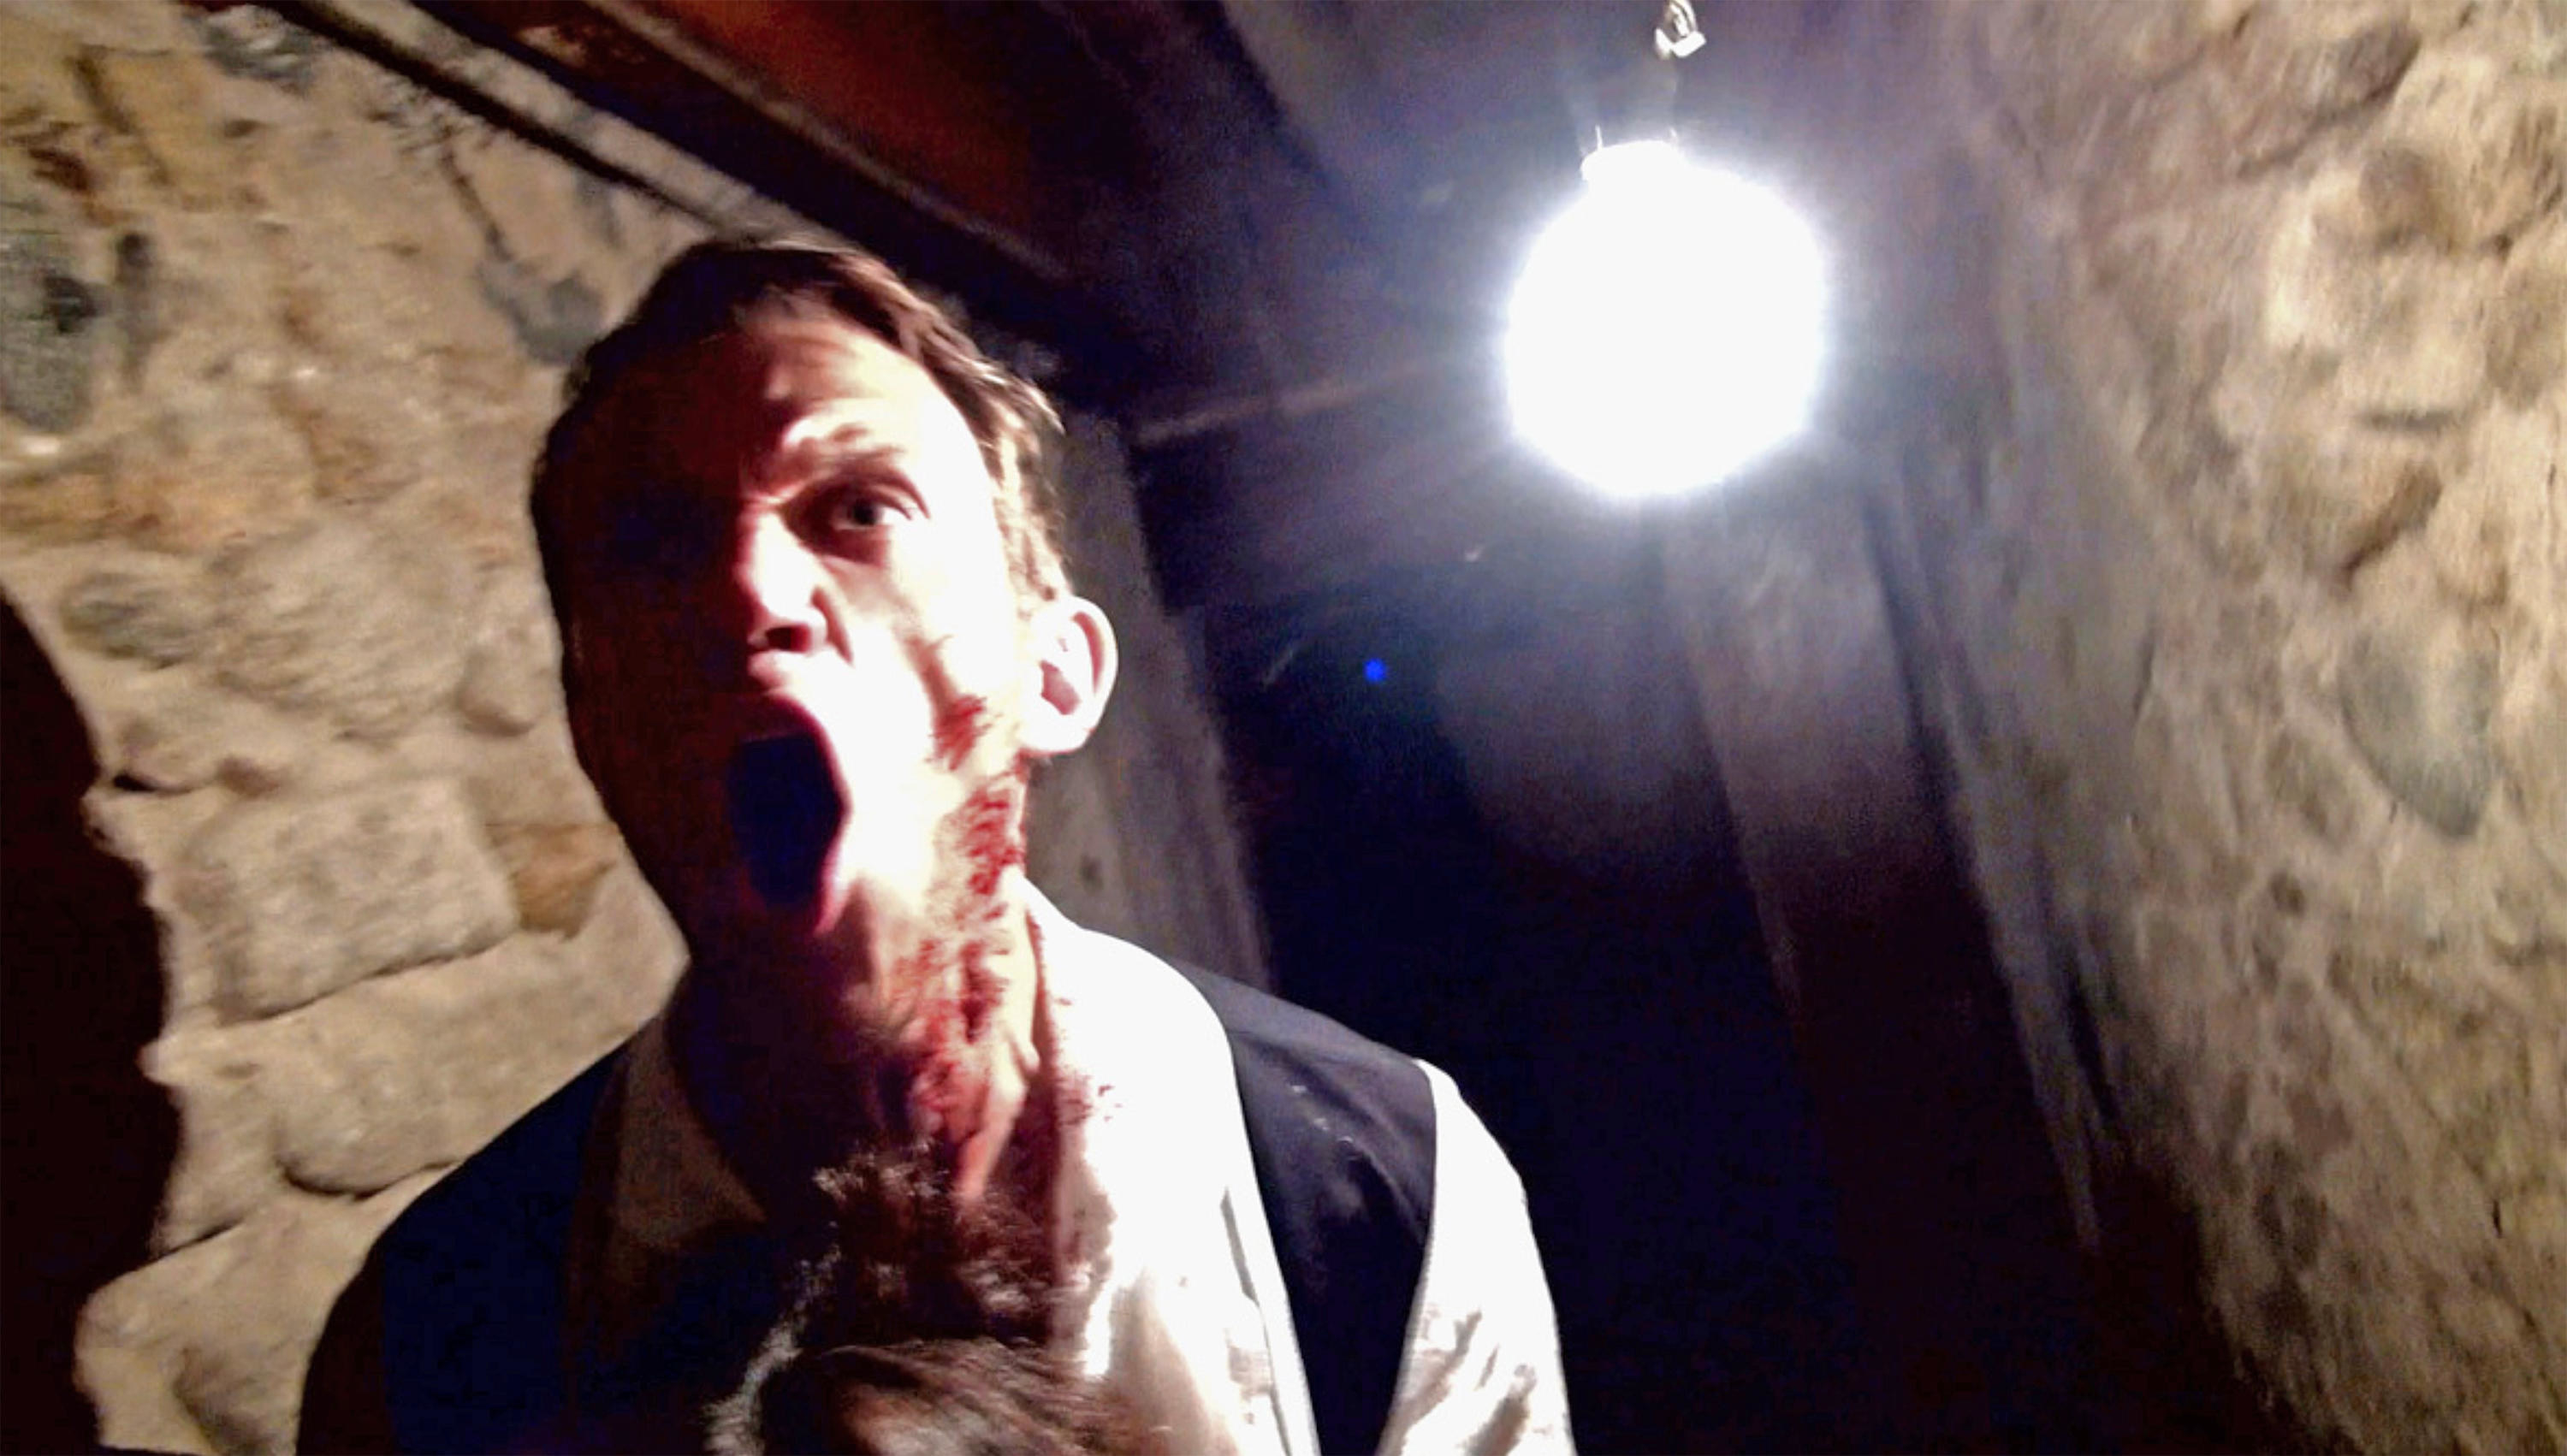 A bloodied man screams in a tight stone hallway